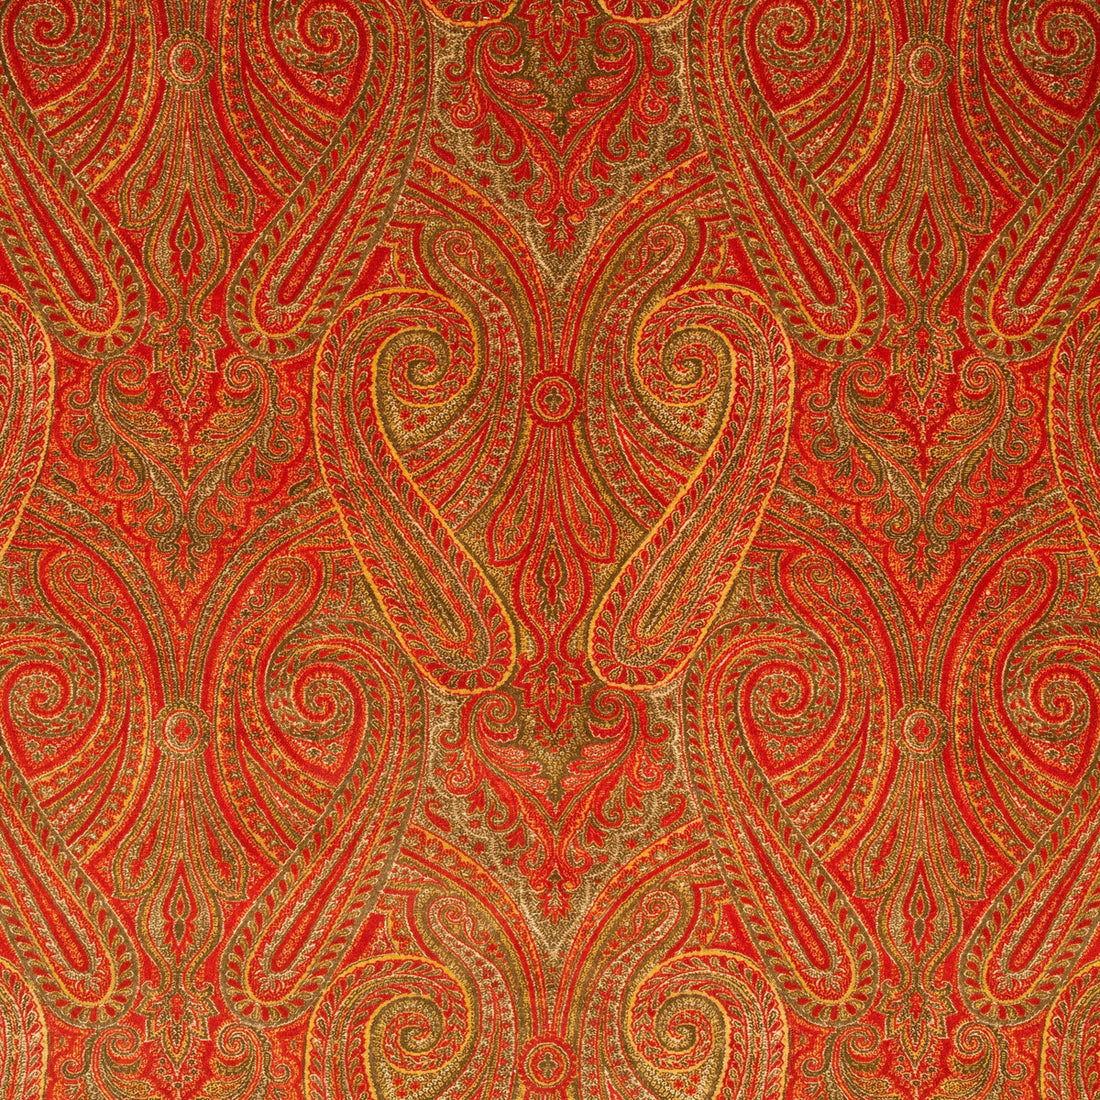 Bonfire fabric in autumn color - pattern AM100405.424.0 - by Kravet Couture in the Andrew Martin The Secret Garden collection